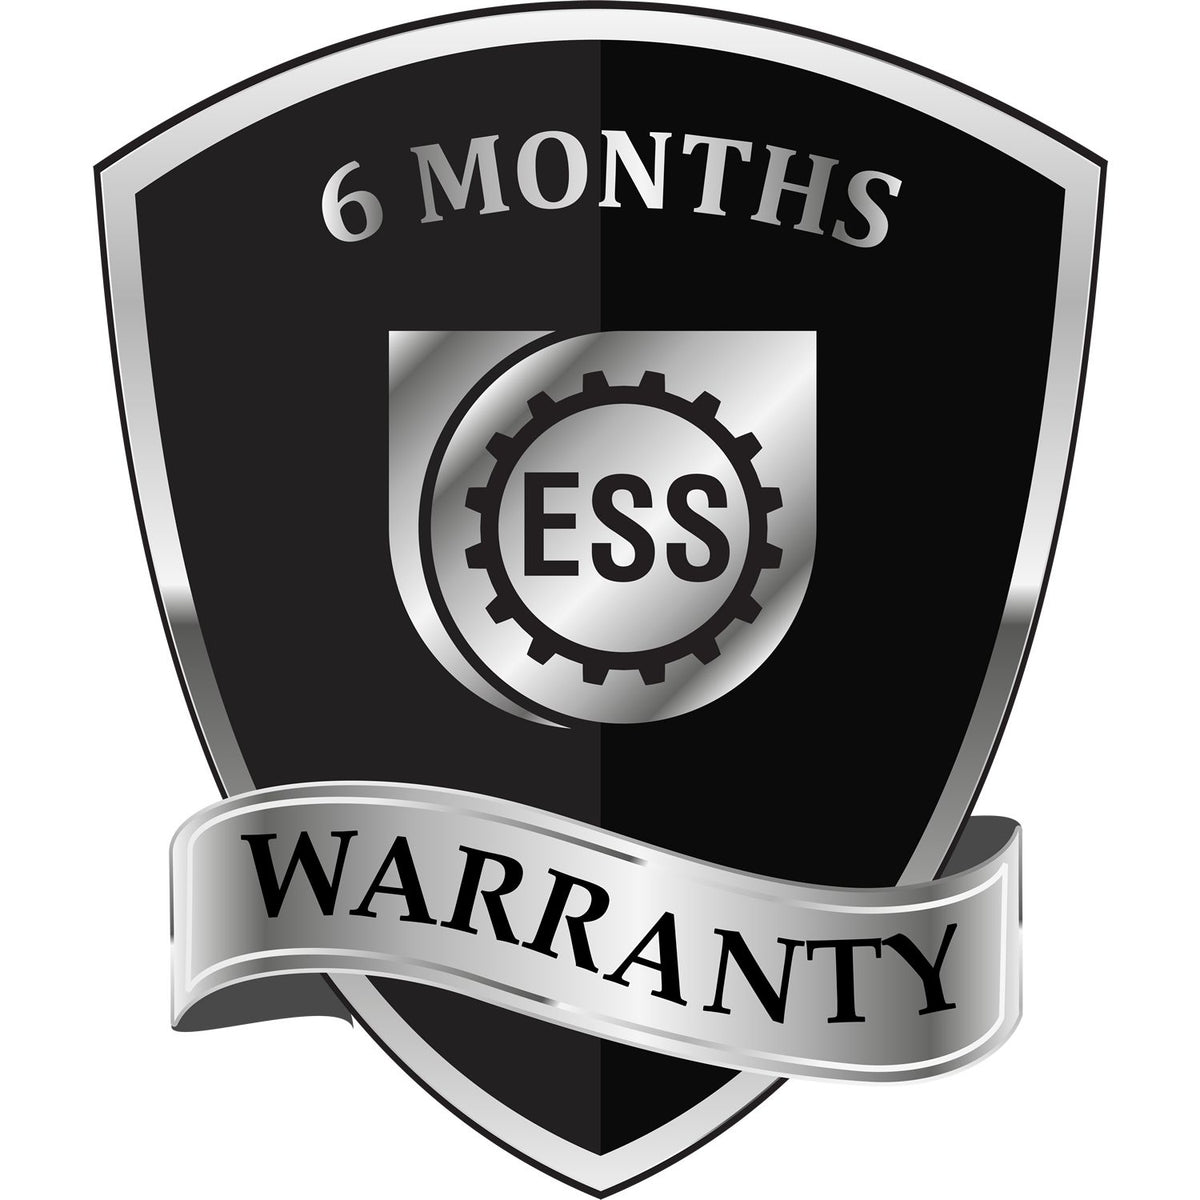 Geologist Slim Pre-Inked Rubber Stamp of Seal 3007GEO 6 Month Warranty